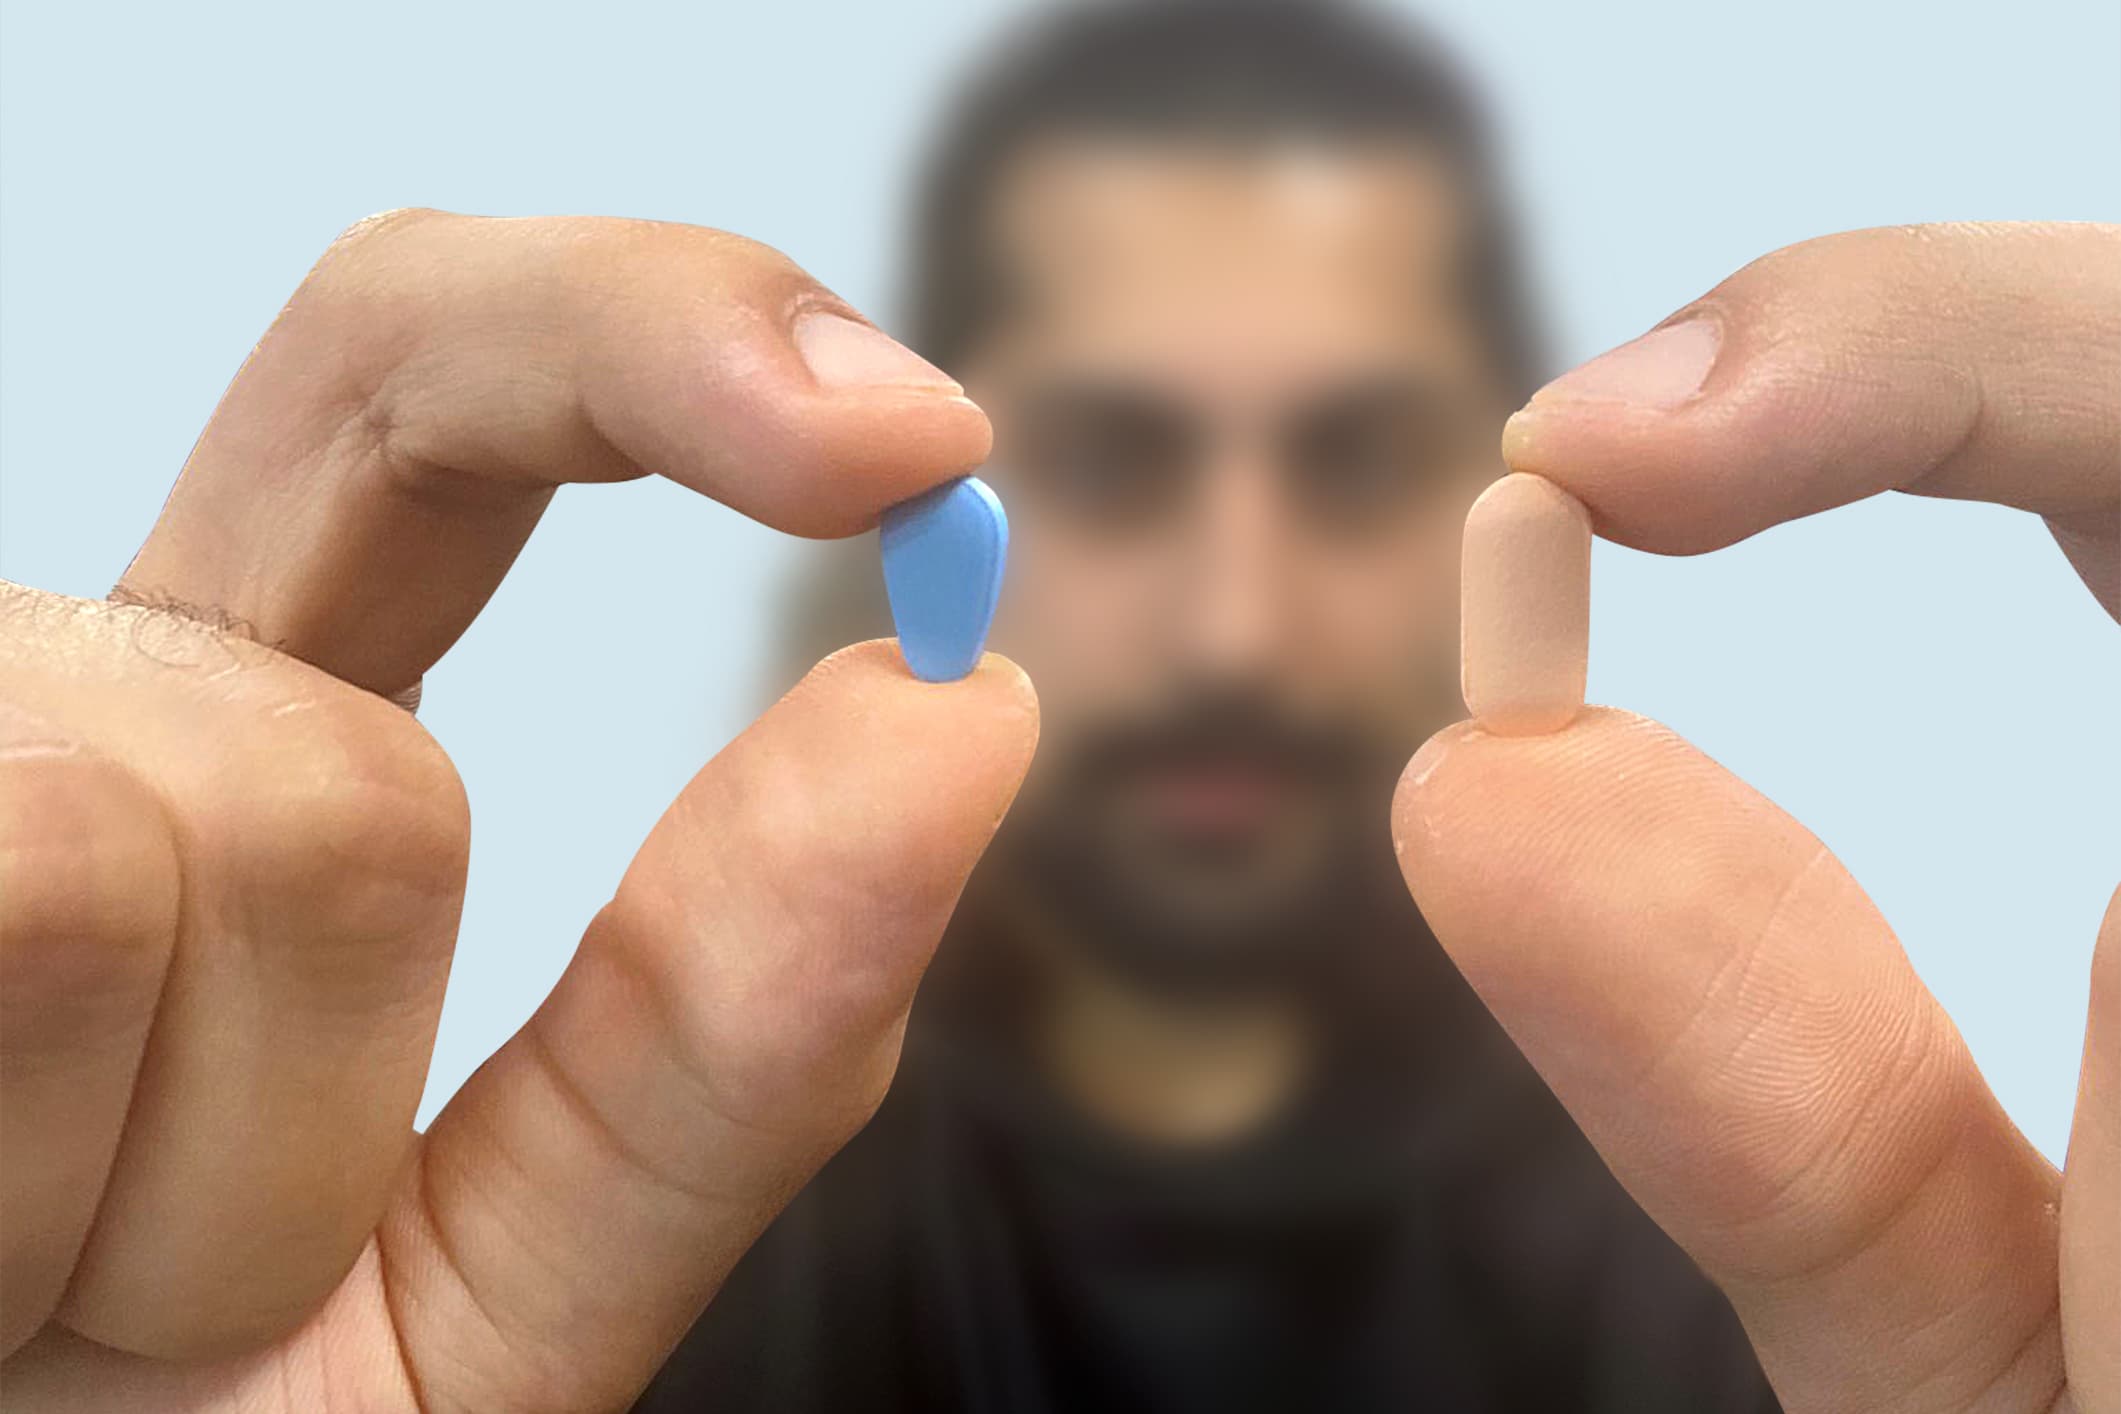 A man holding a Viagra tablet and a Cialis tablet